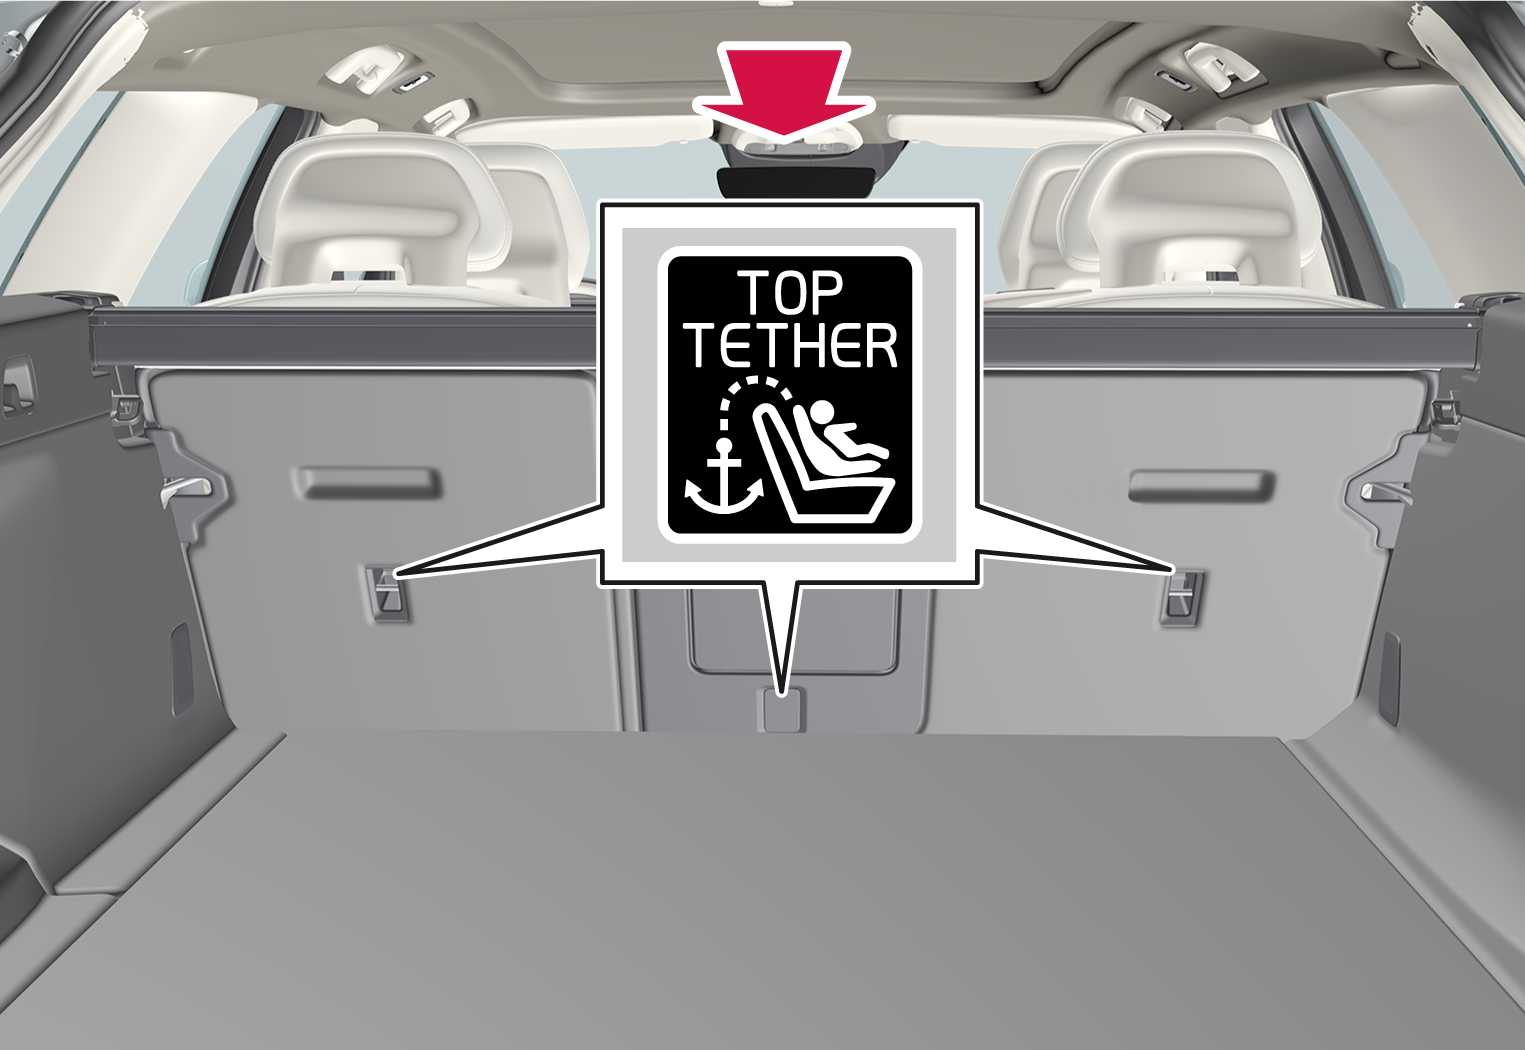 P5-21w46-AUS-V90XC60–Safety–Top tether position